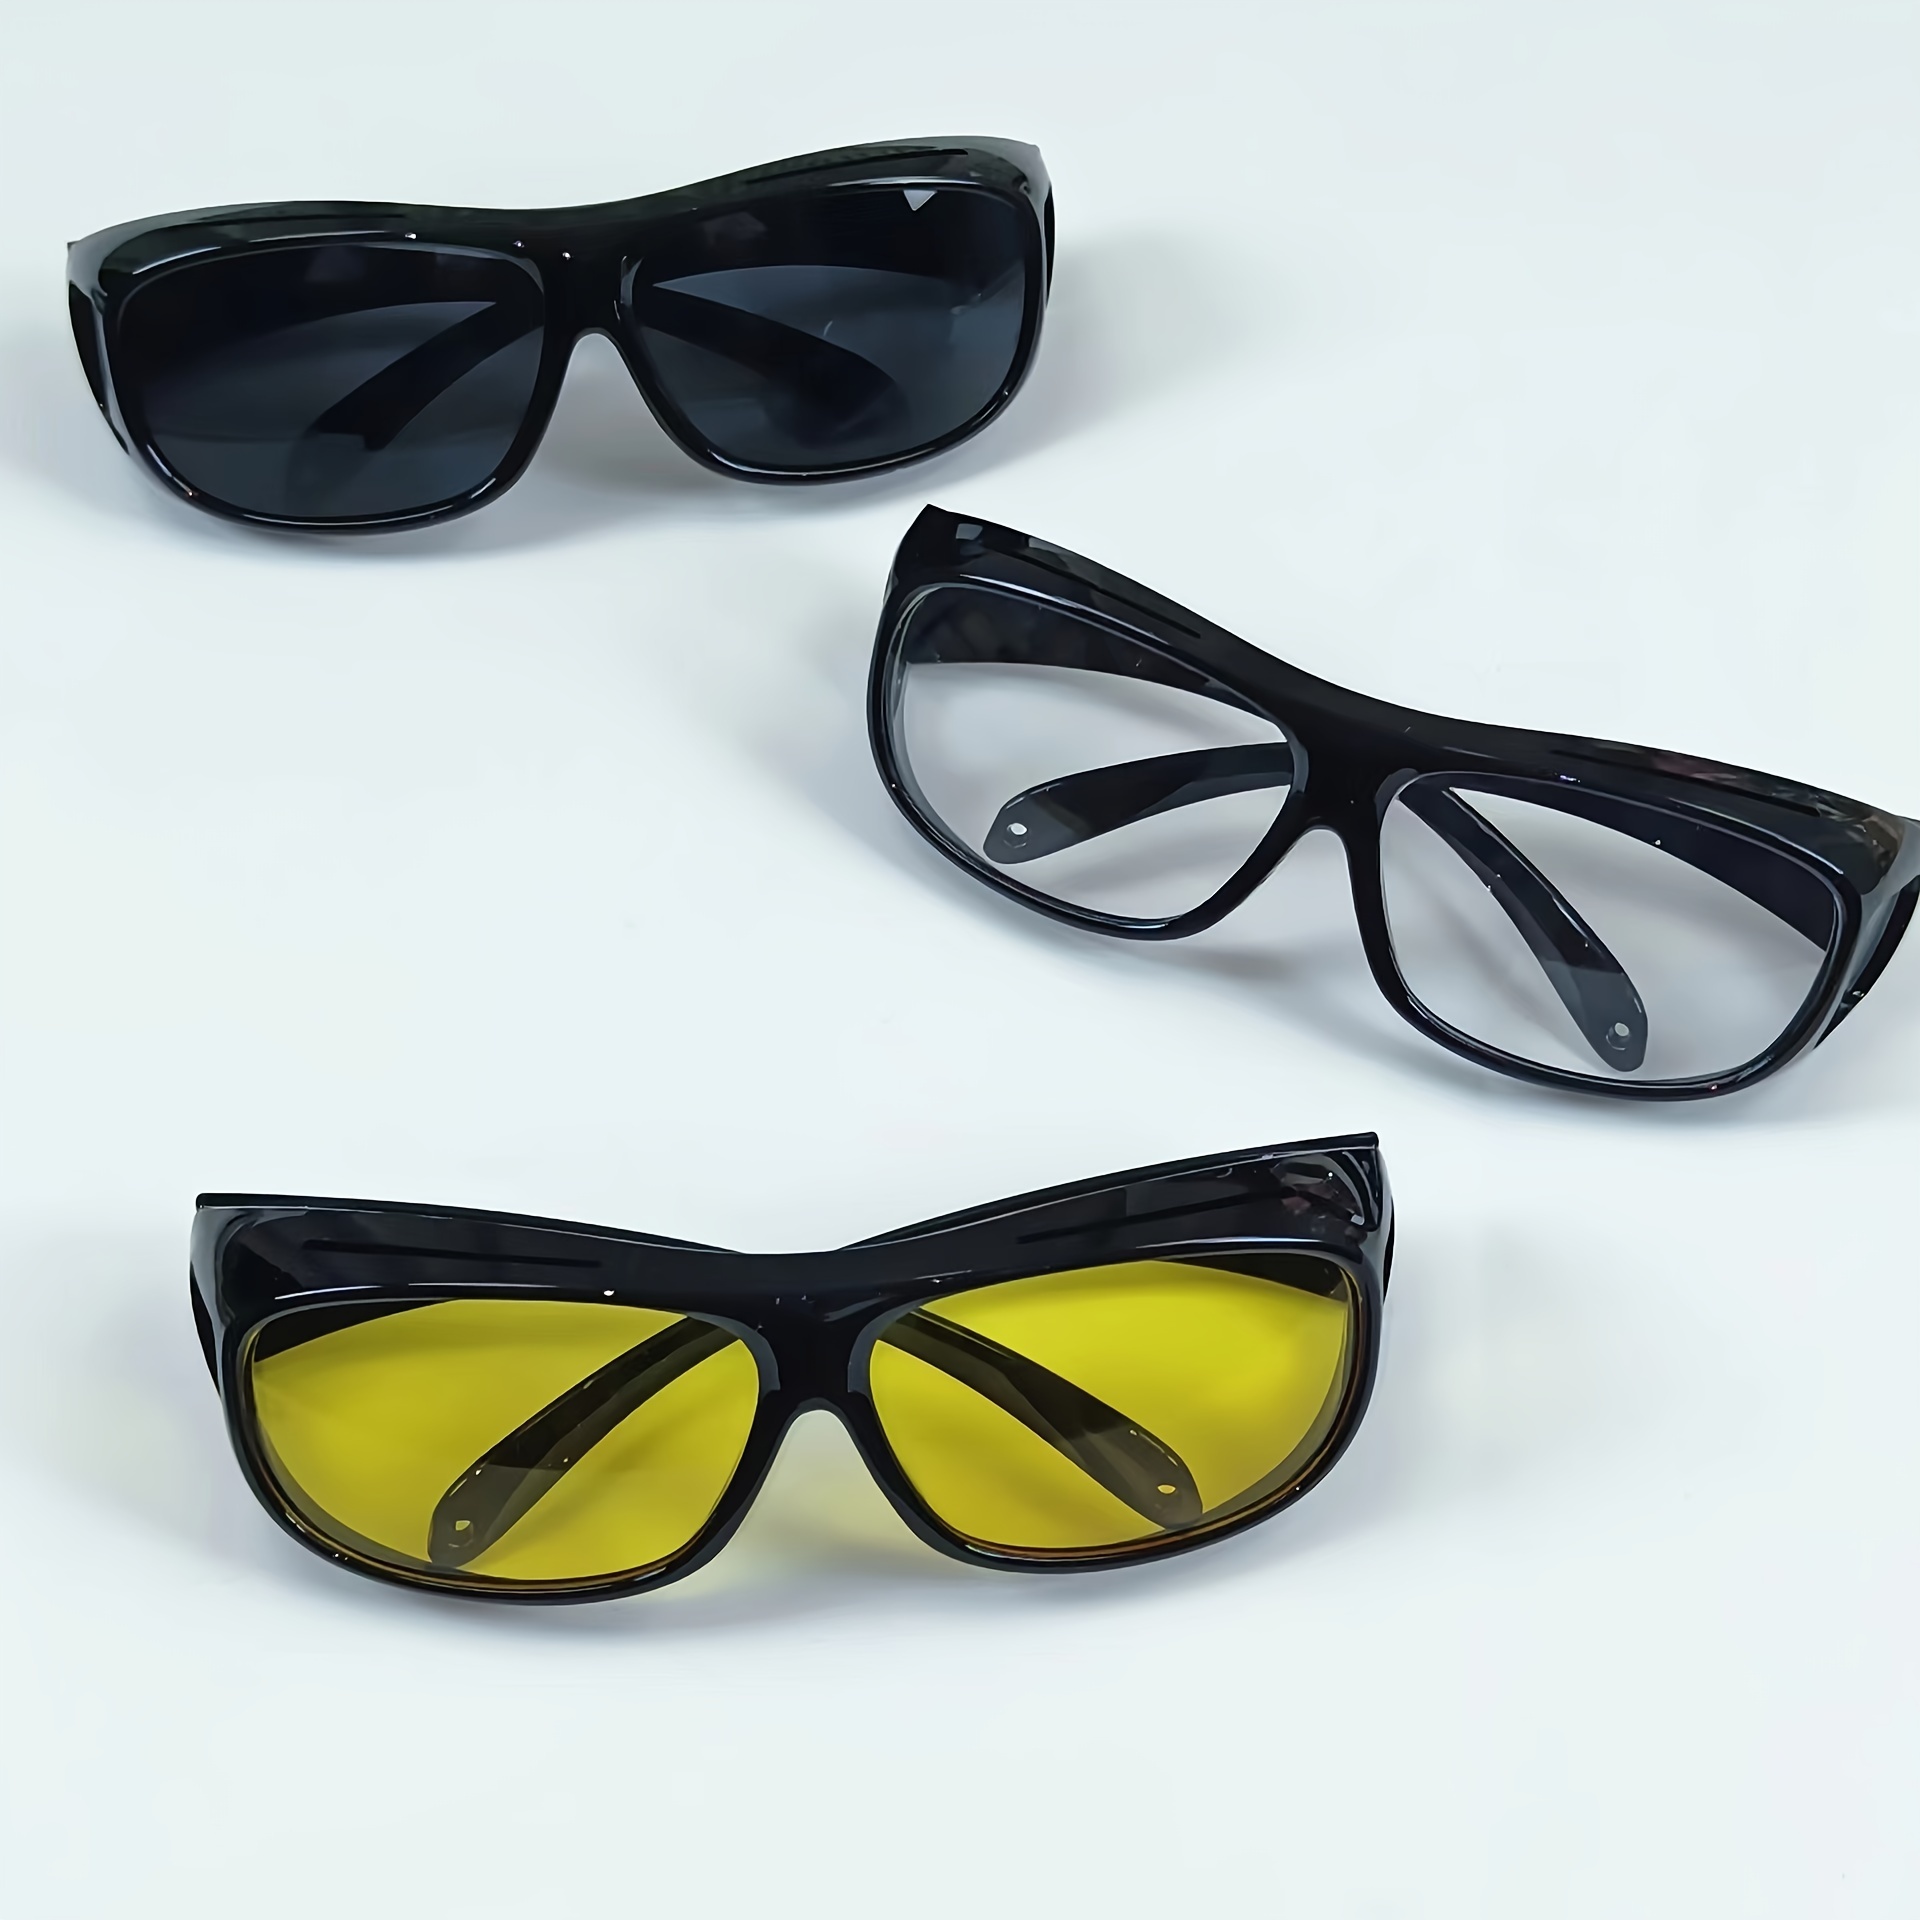 Trendy Cool Small Sunglasses With For Fit Over Glasses Night